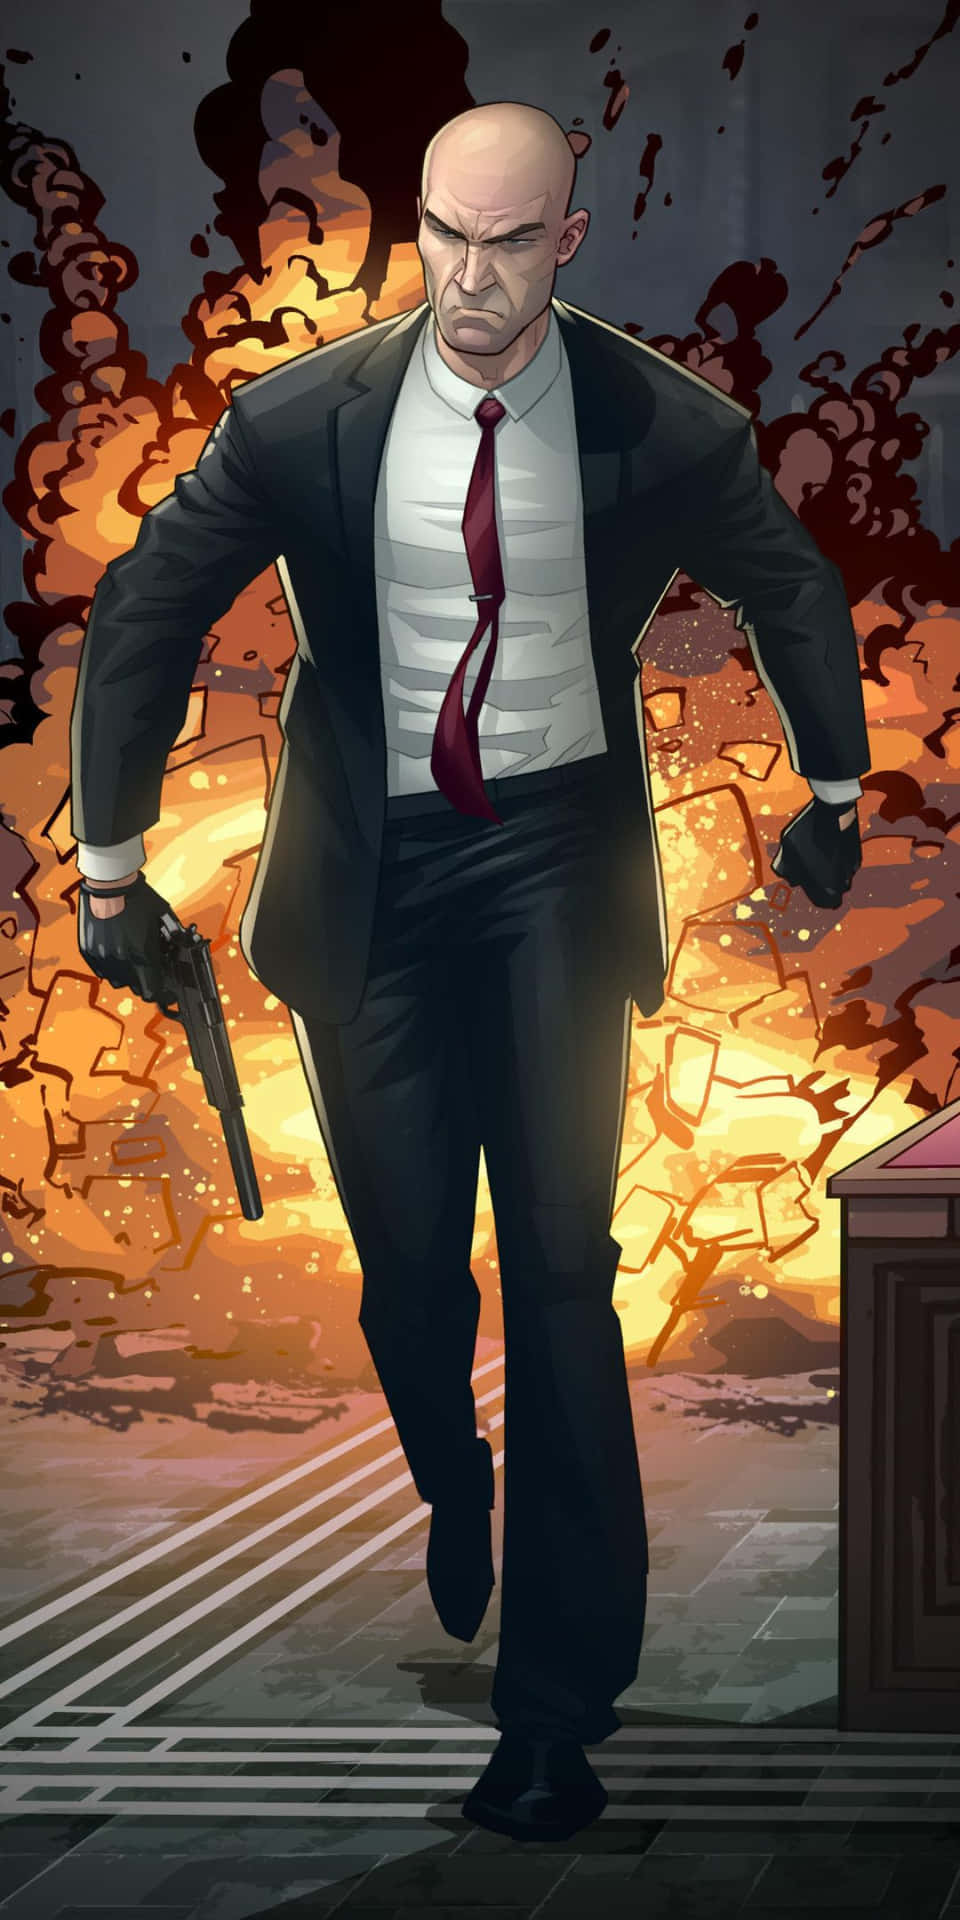 A Man In A Suit Is Walking Through A Fire